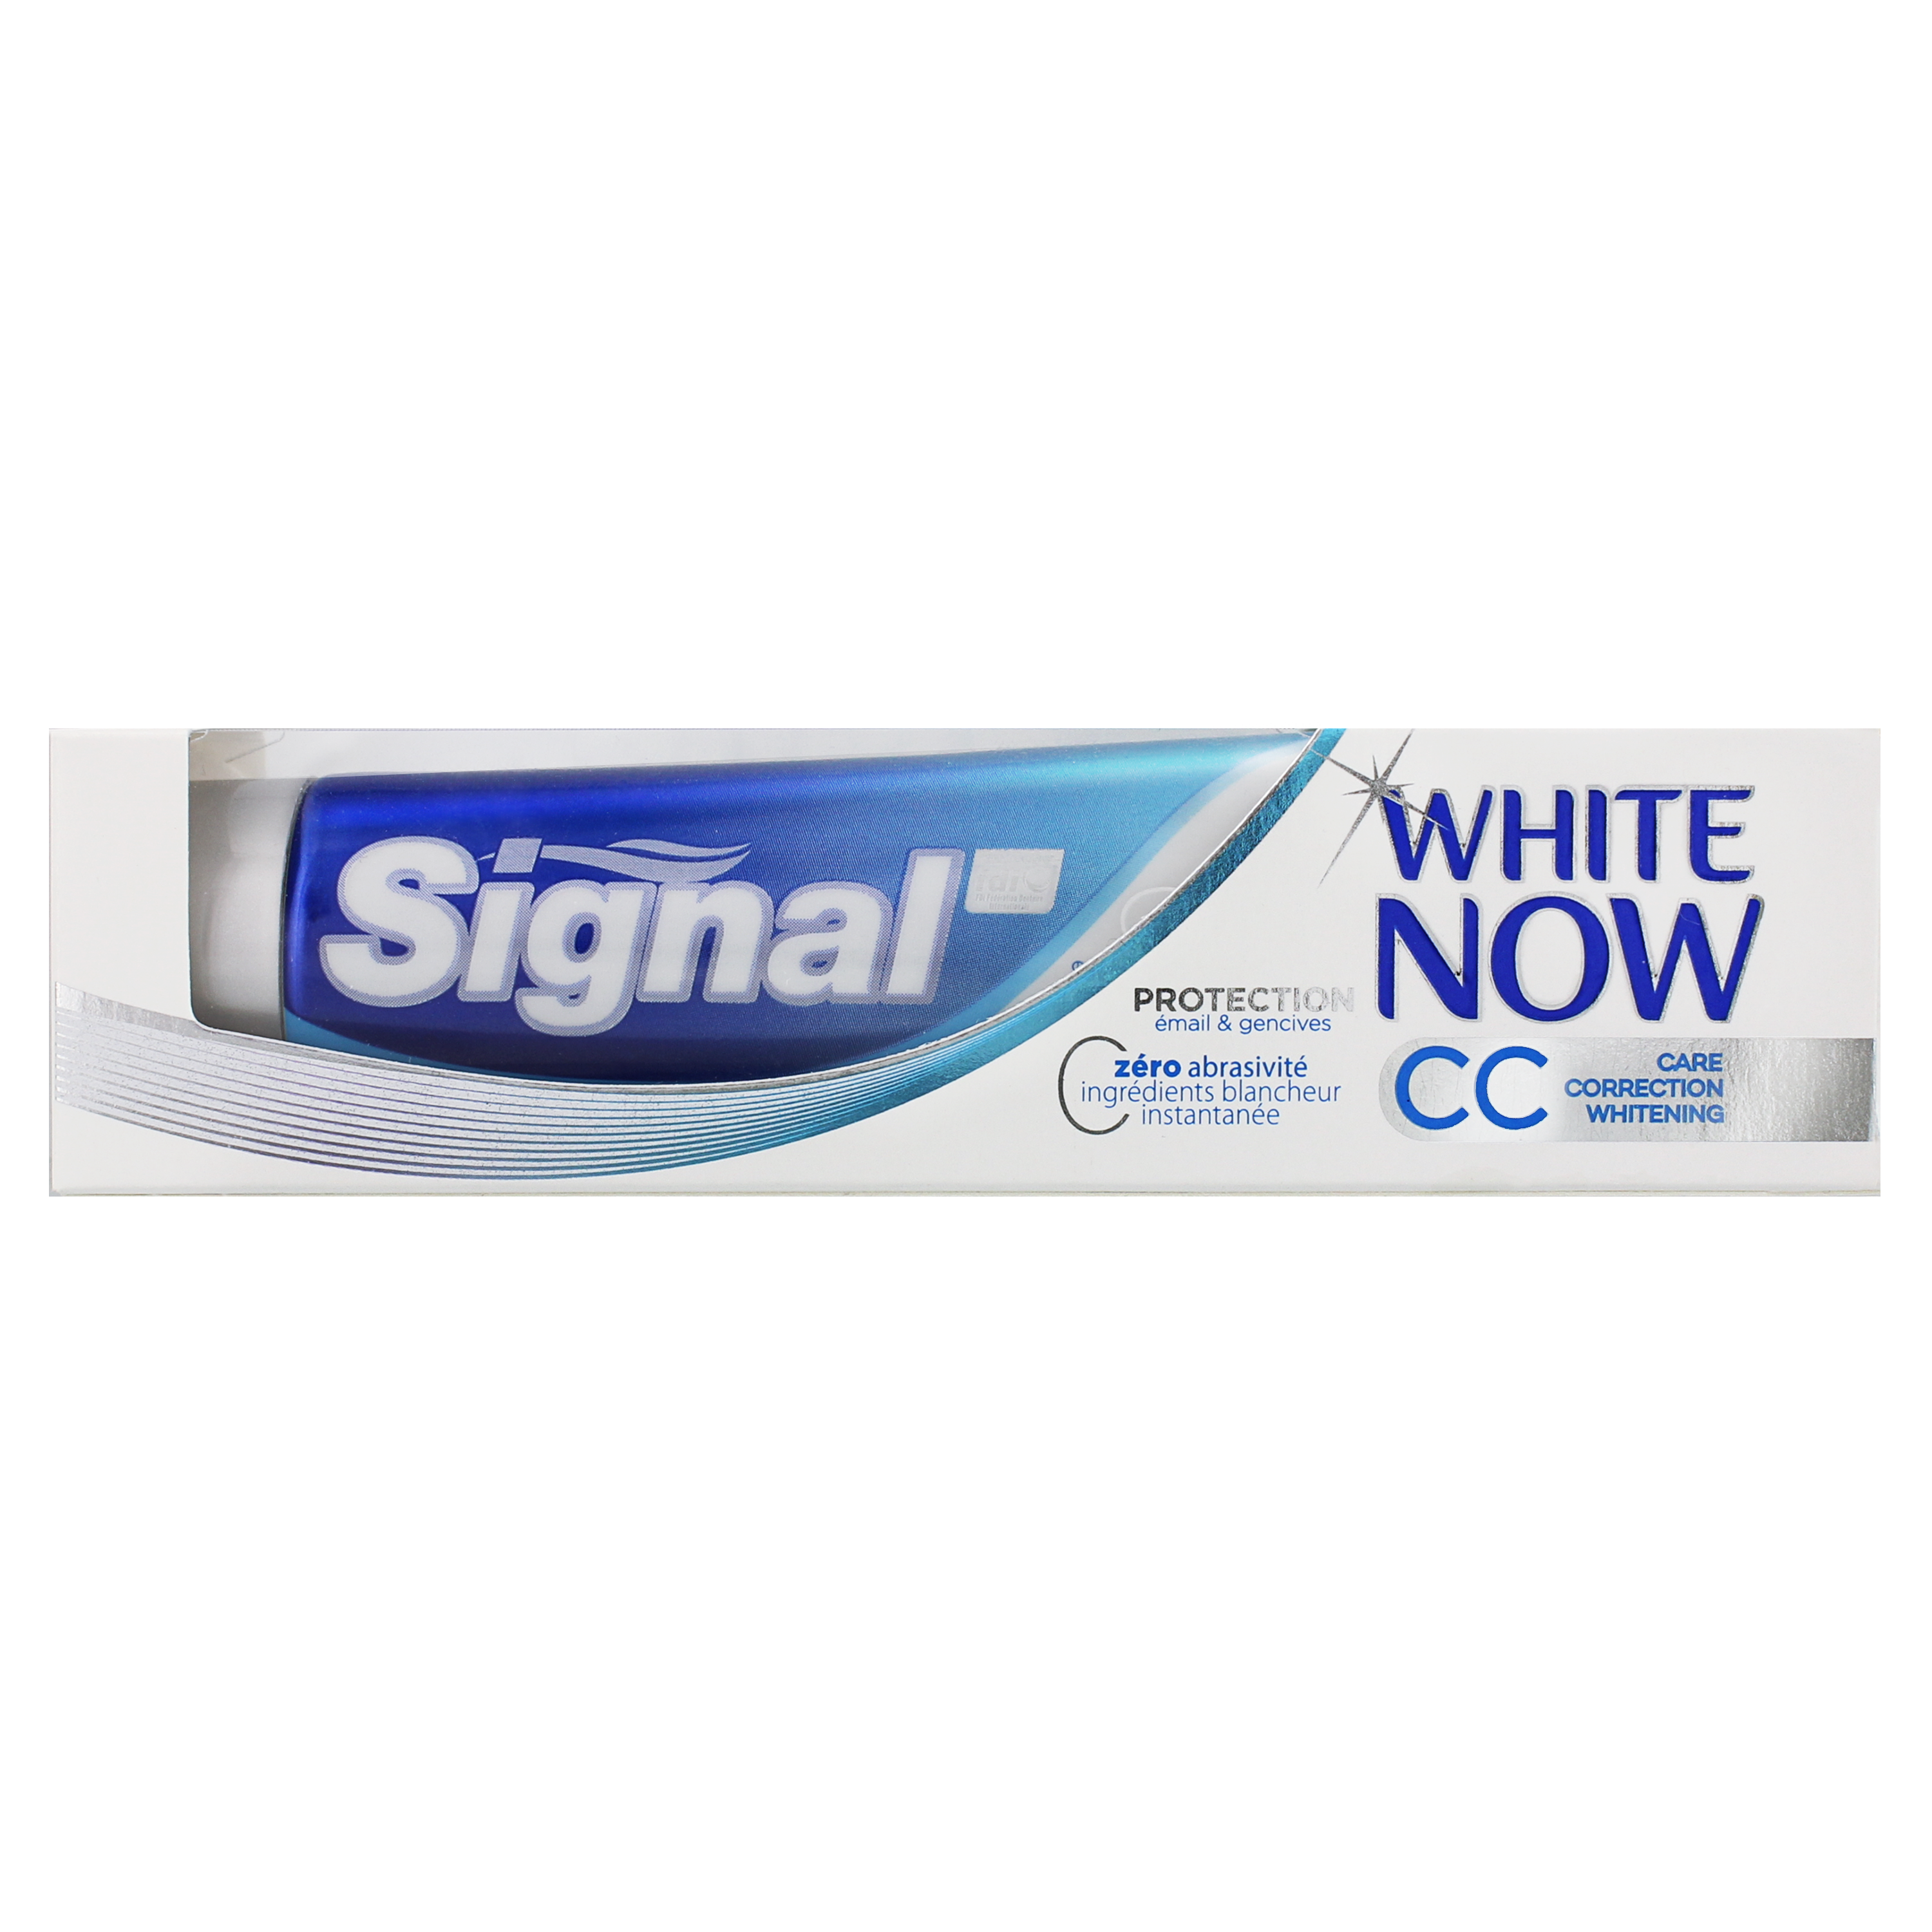 Portico hjælp rod White Now: Instant whiter teeth | Signal